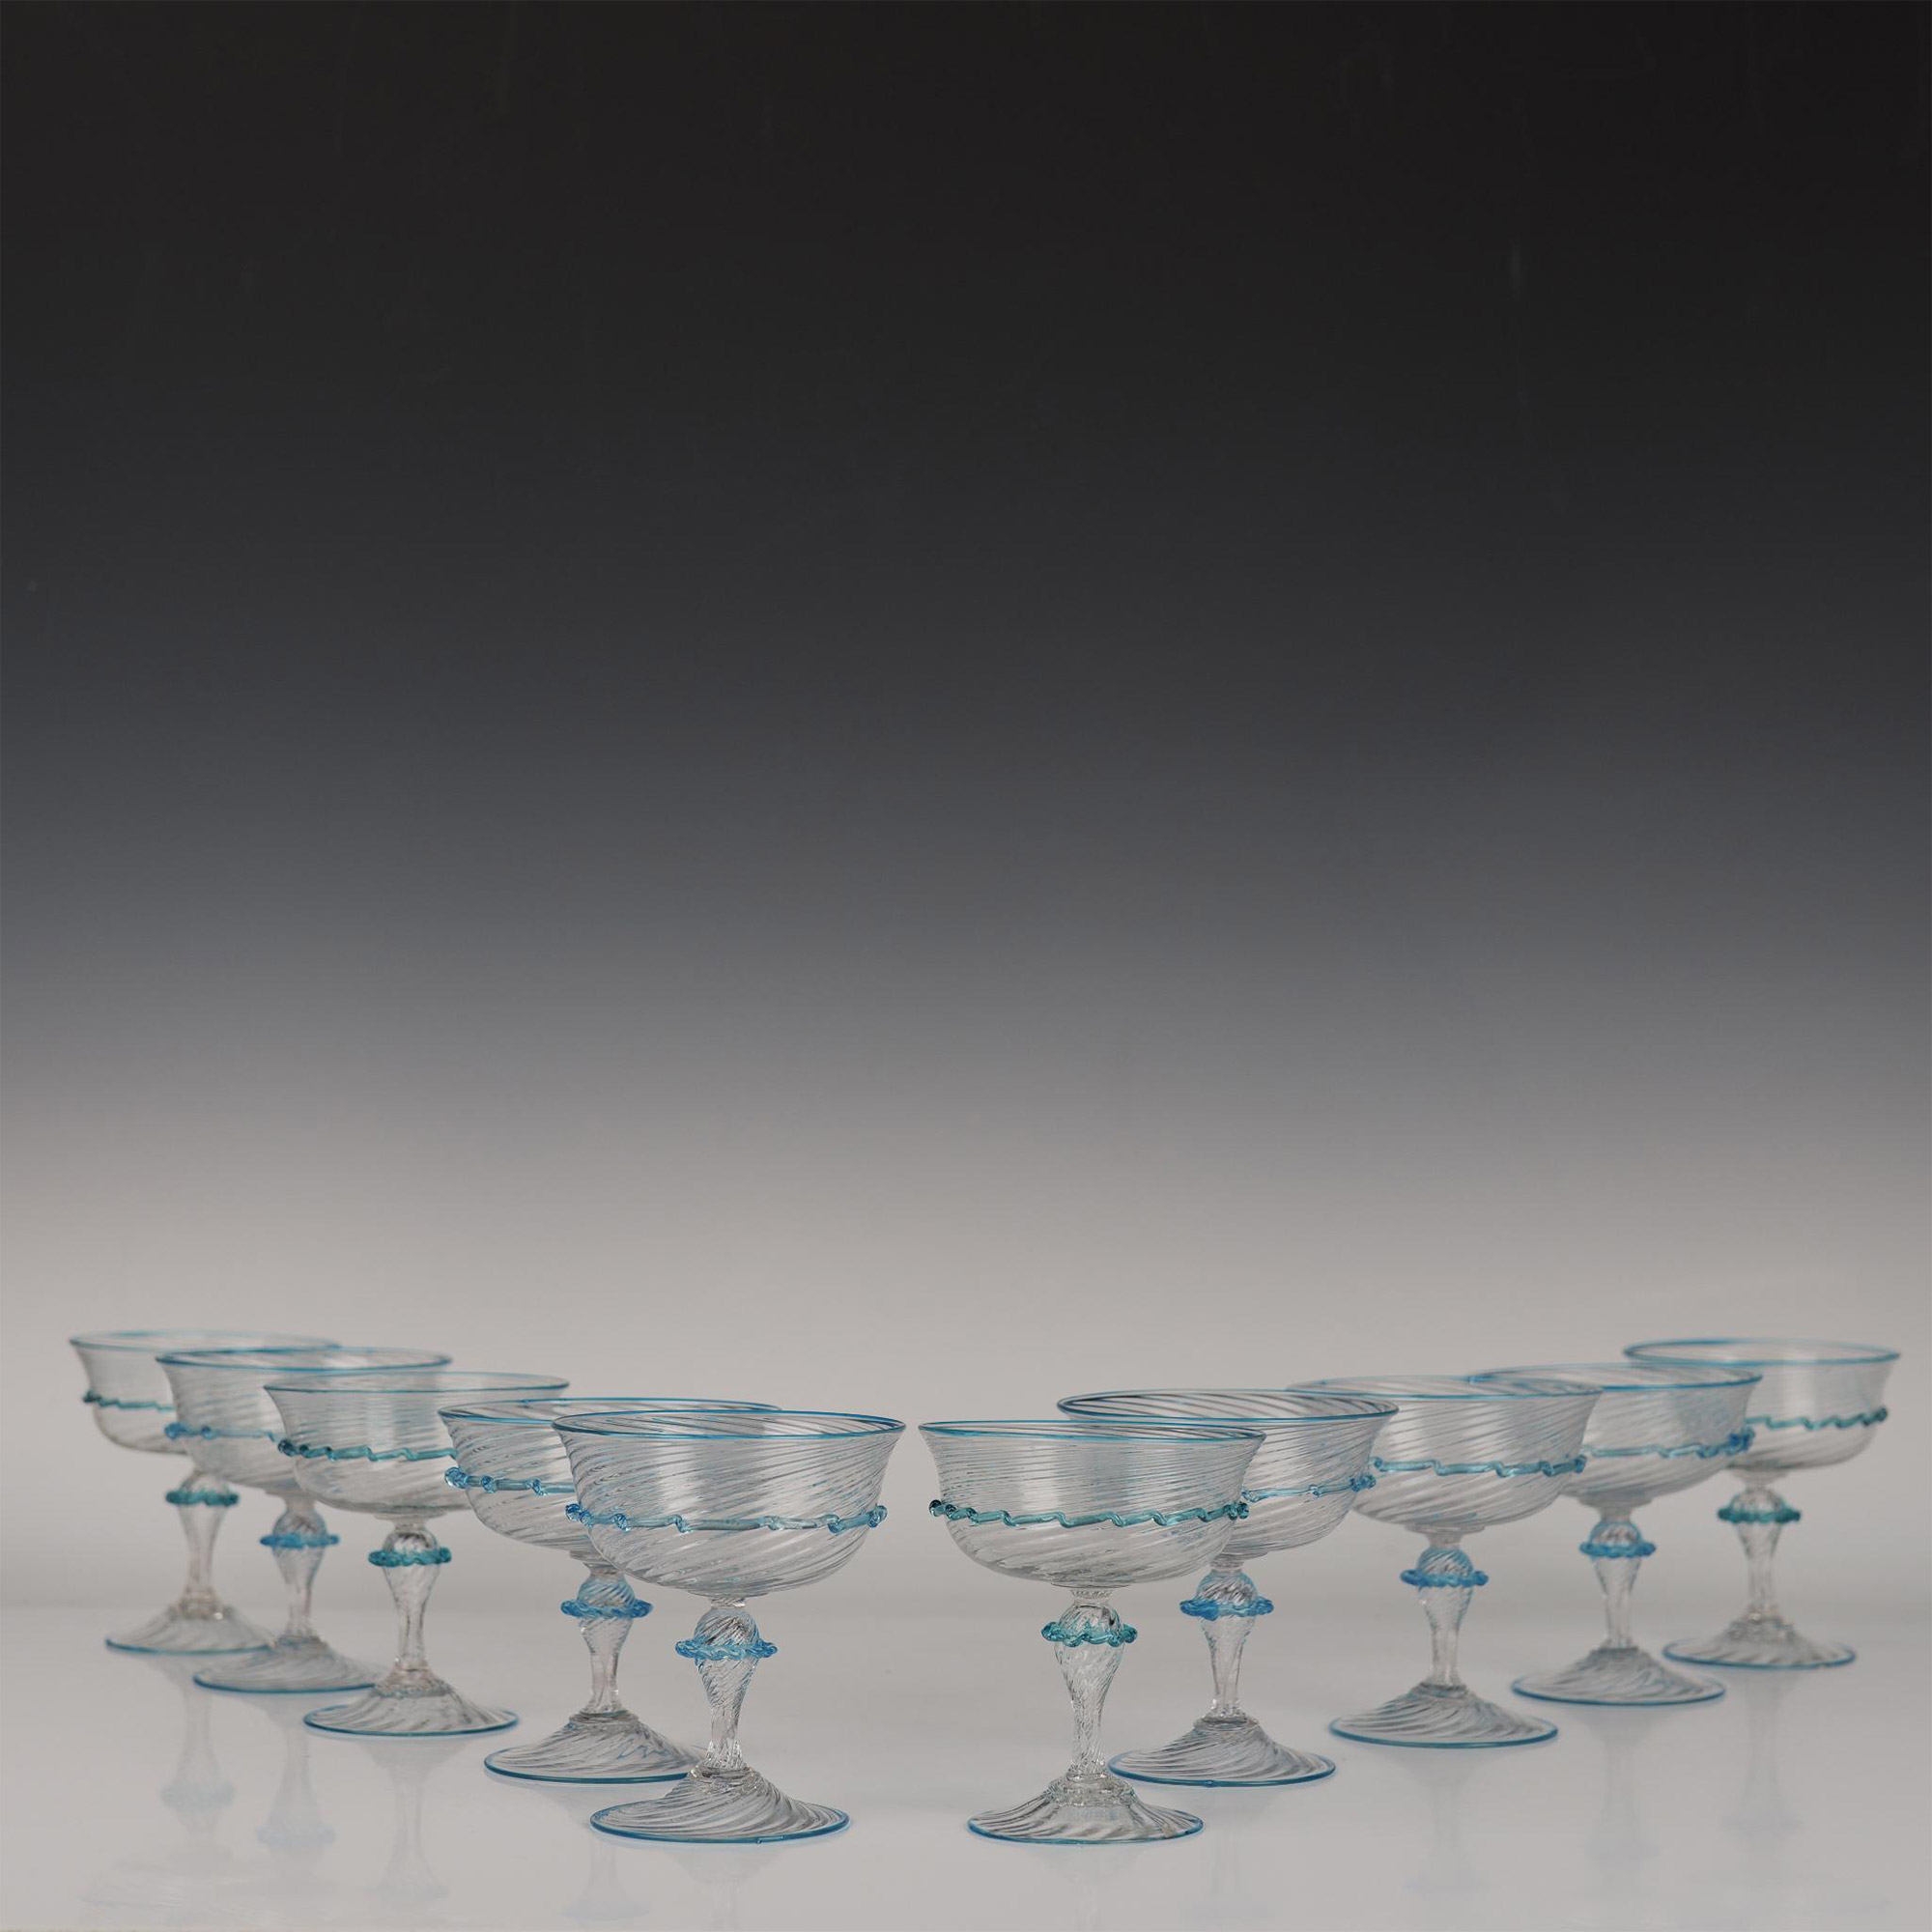 10pc Murano Venetian Coupe Glasses w/Applied Rigaree - Image 3 of 4